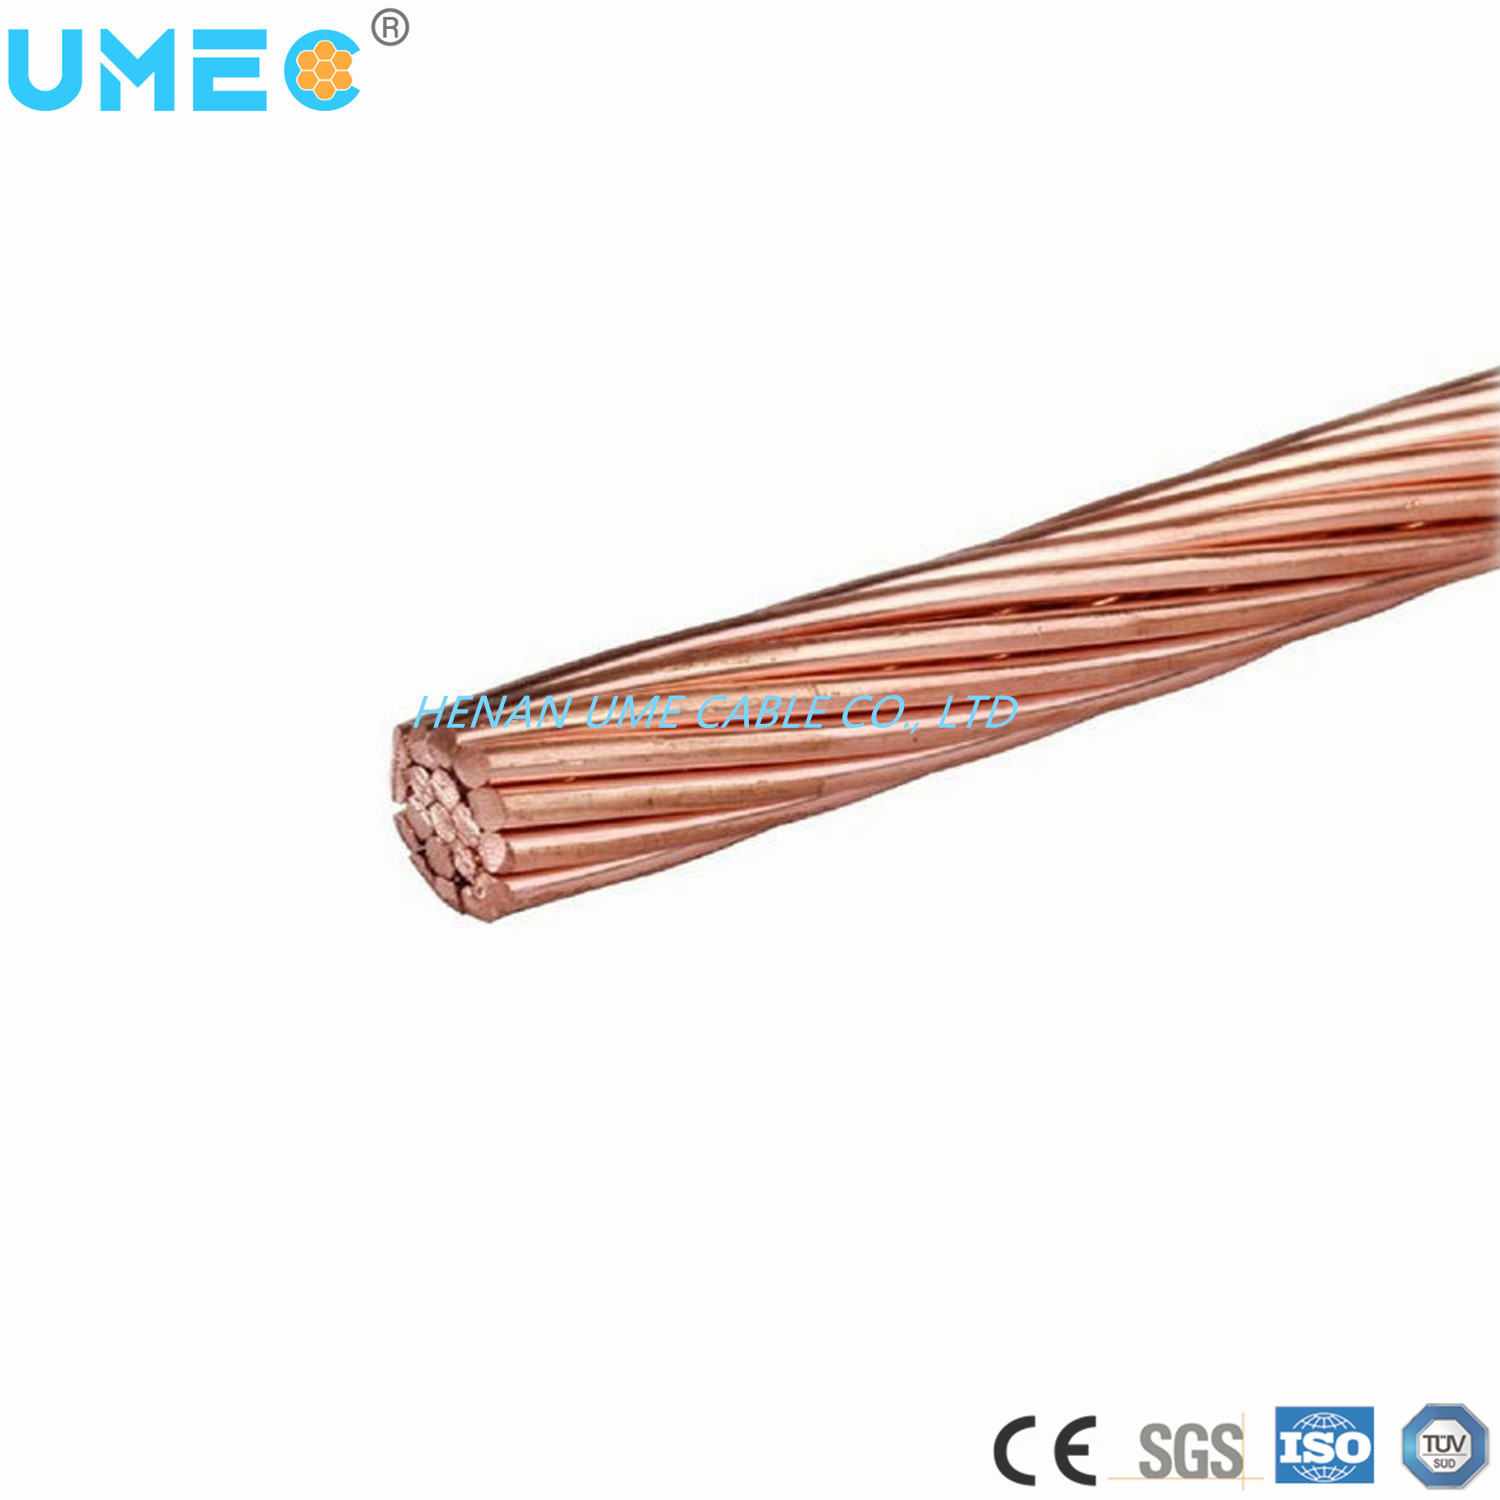 1.5mm 2.5mm 4mm BS ASTM Standards Overhead Wire Transmission Line Bare Copper Conductor